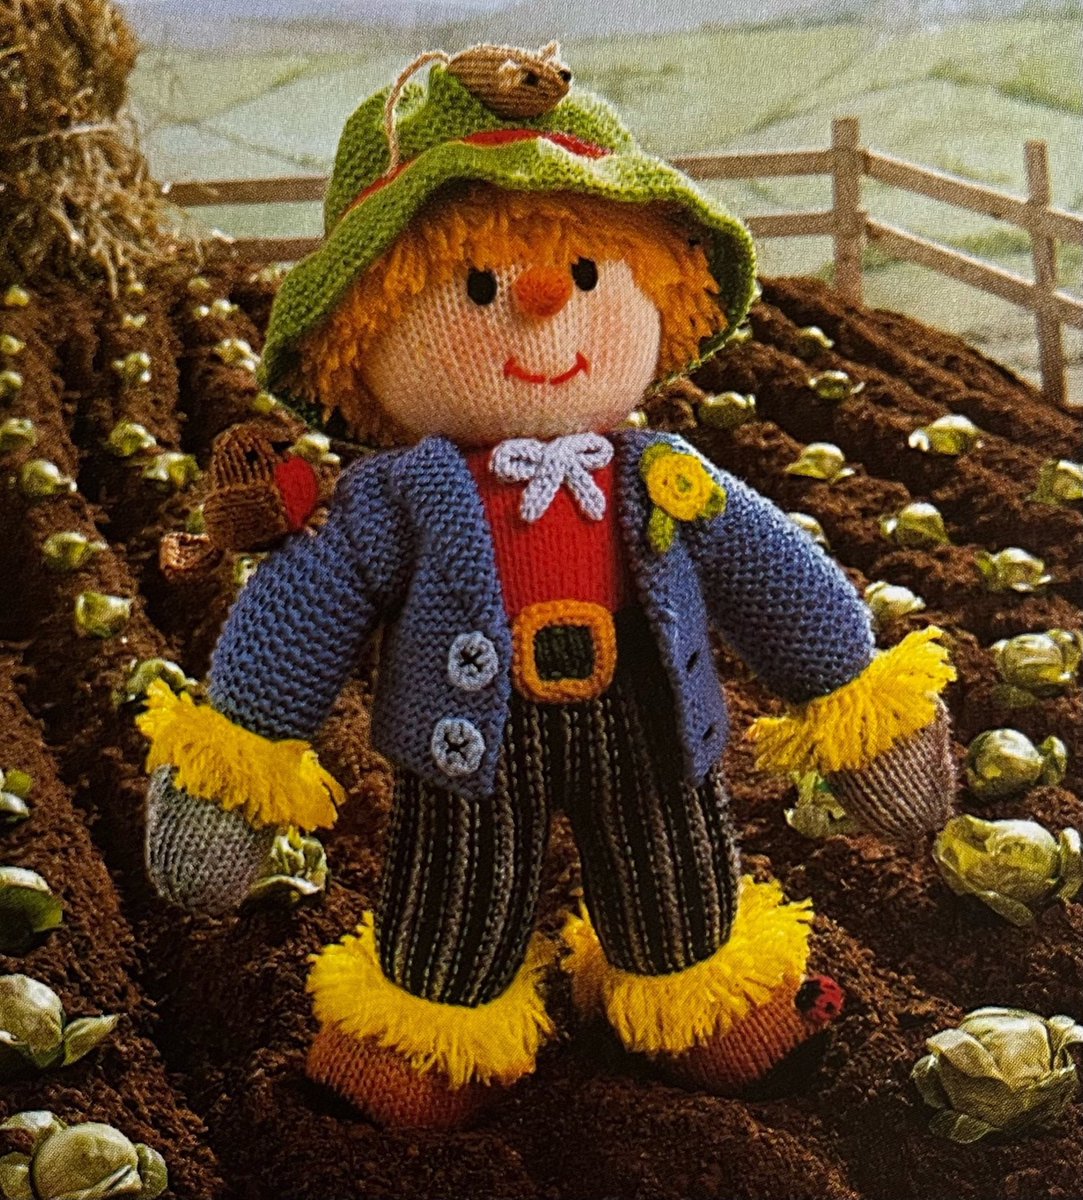 Vintage Knitted Toy Scarecrow Pattern #knittedscarecrow #MHHSBD #yourbizhour #vintageknits #magic #sewing #scarecrow #ladybird #robin #mouse #knittedtoy #knitteddoll #knits etsy.me/3W2ifX9